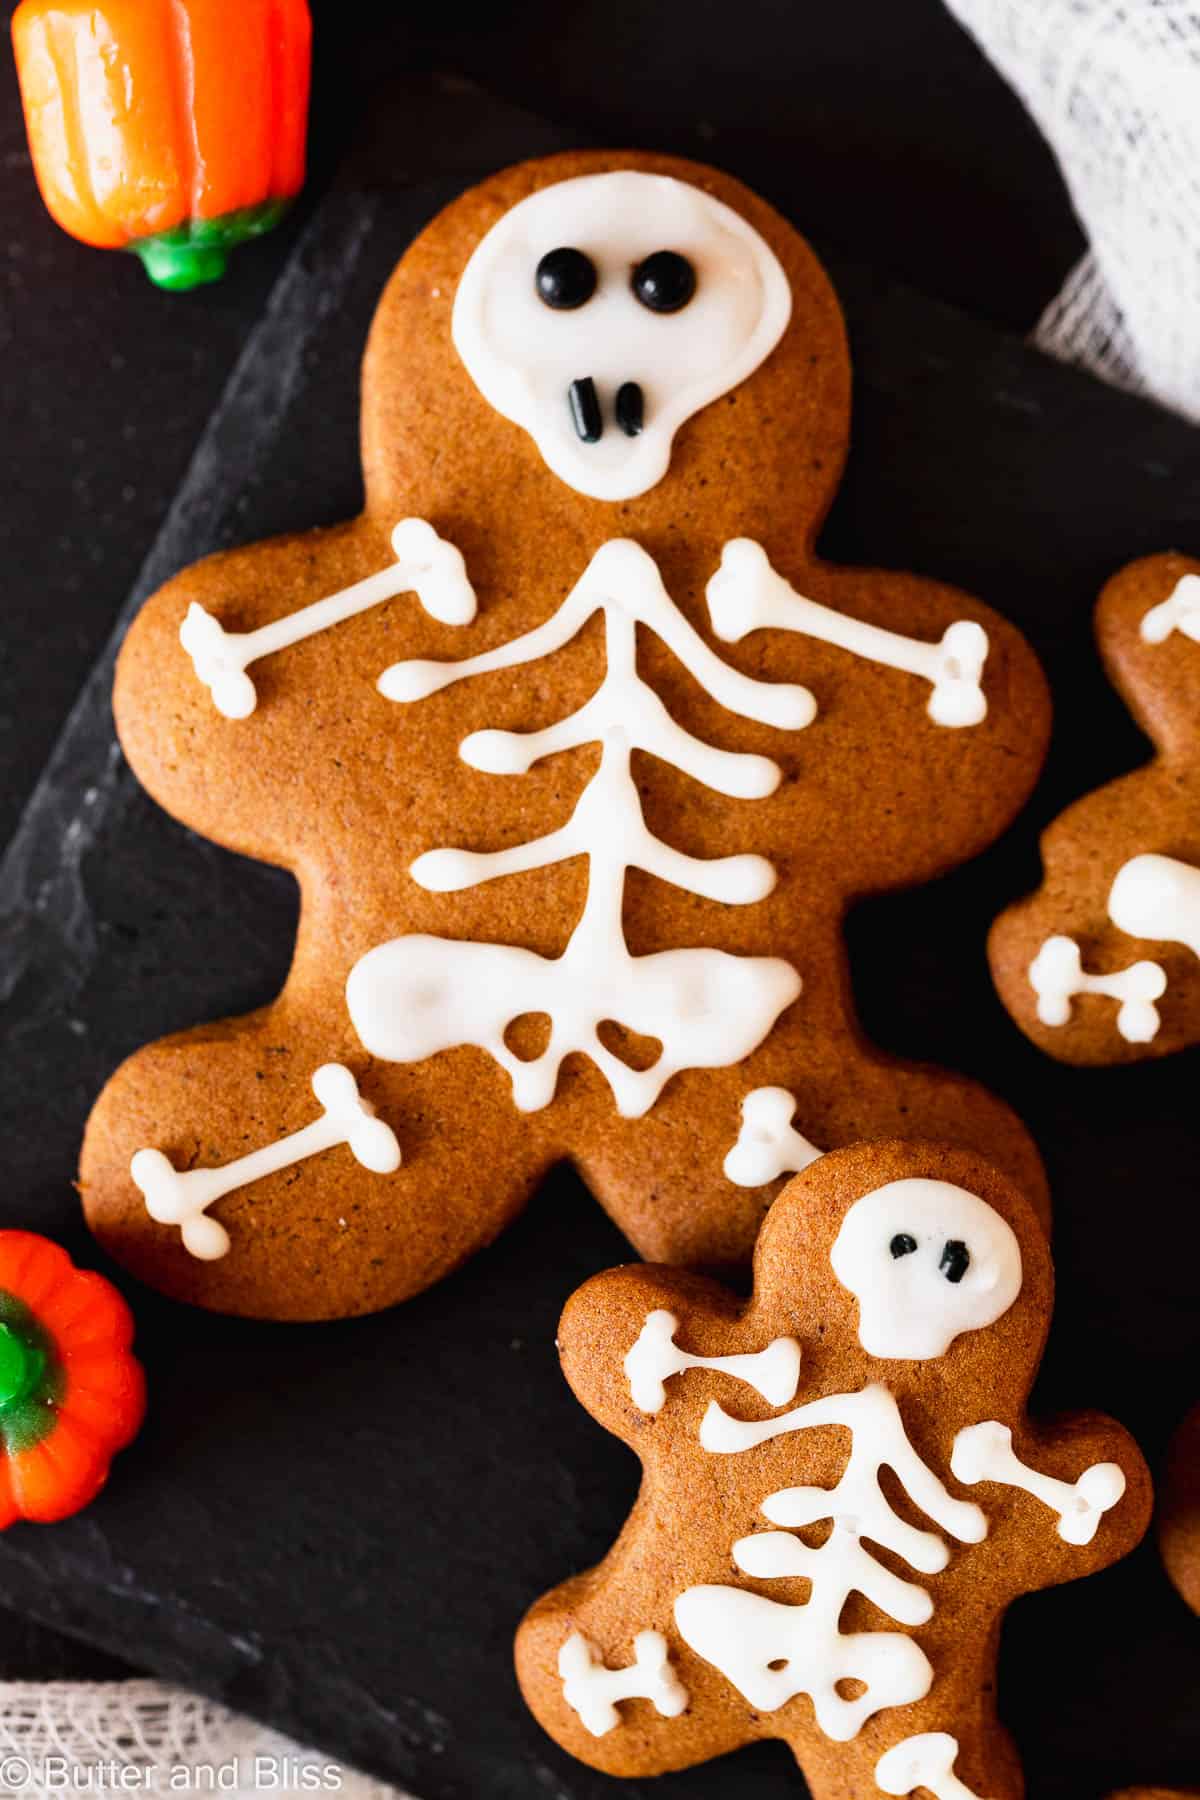 Gingerbread cut-out cookies decorated like skeletons on a small black plate.